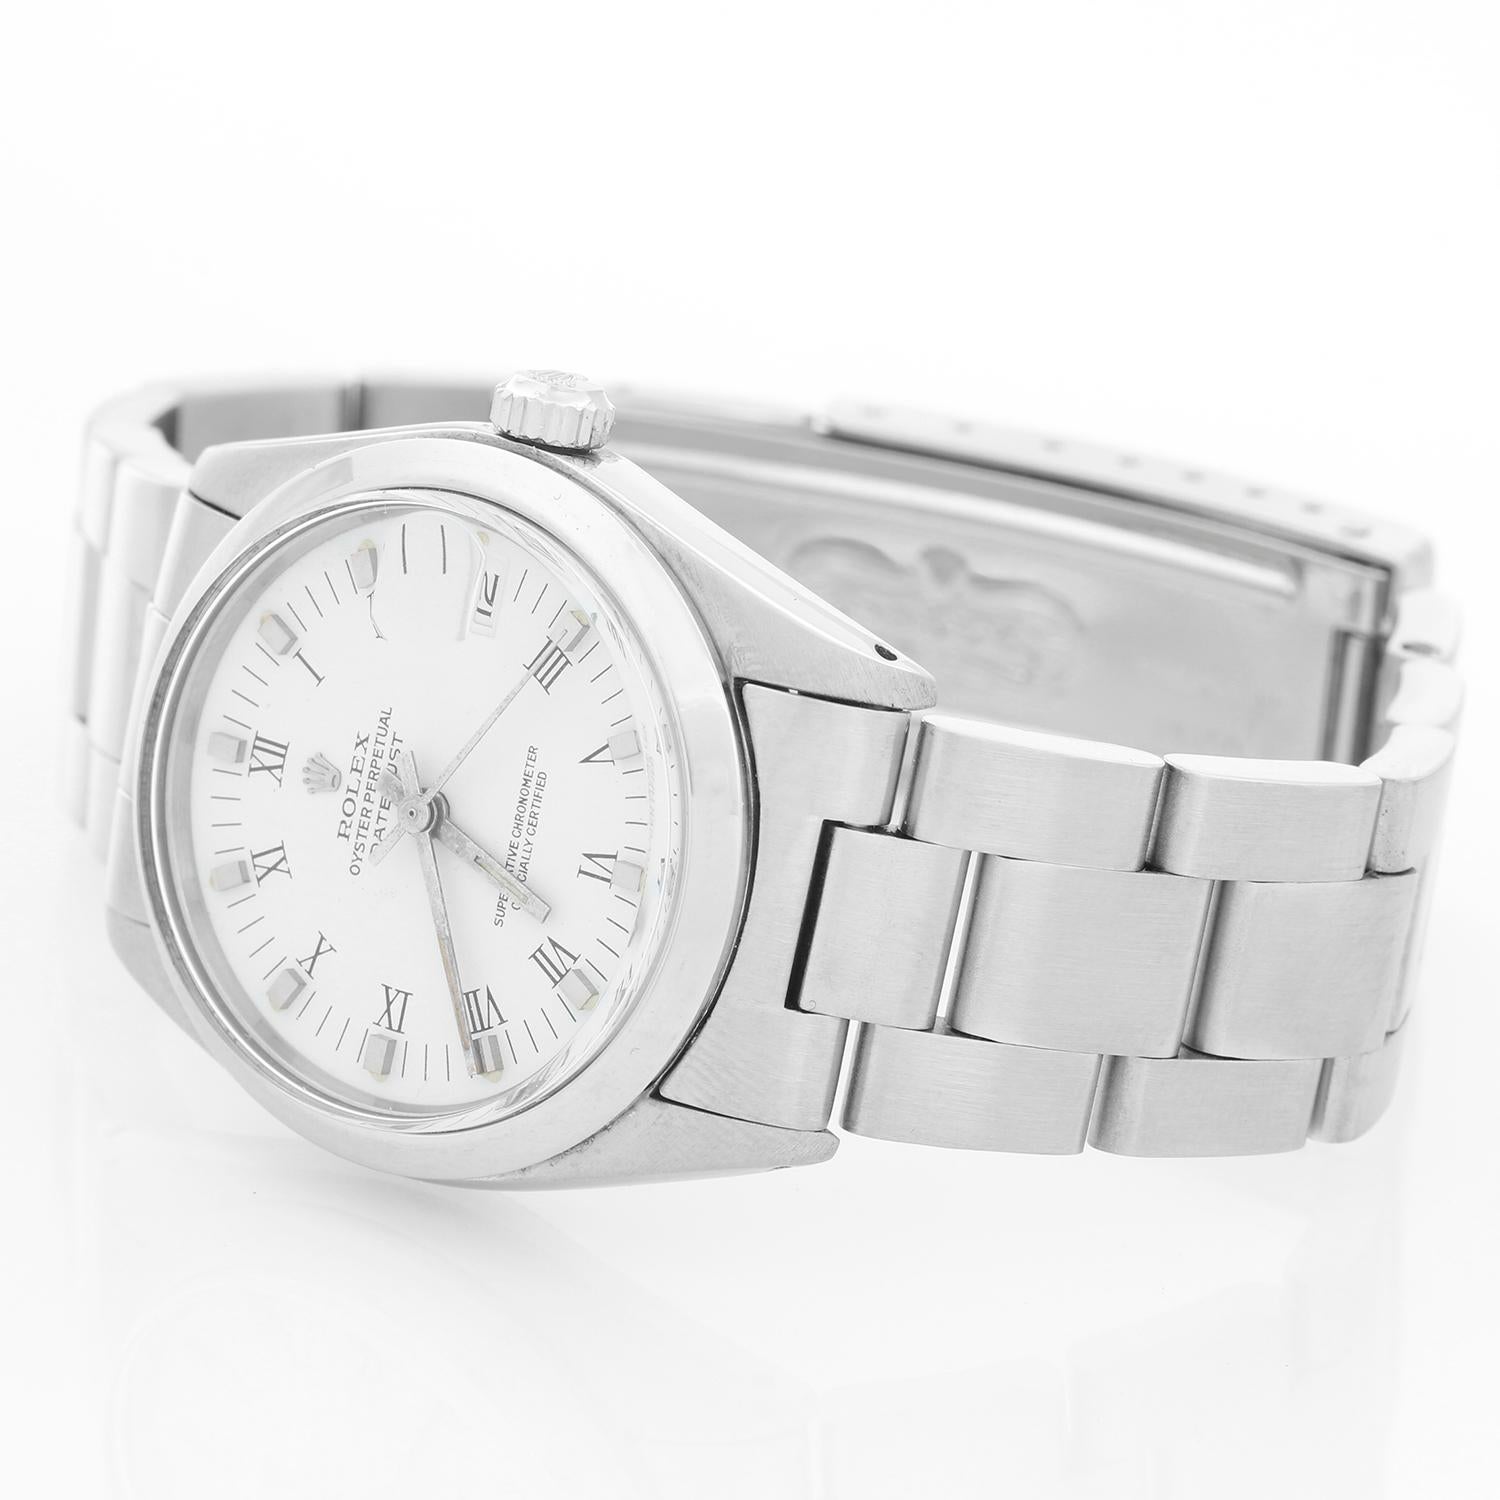 Rolex Datejust Midsize Men's or Ladies Steel Watch 6824 - Automatic winding, 29 jewels, Quickset date, sapphire crystal. Stainless steel case with smooth bezel (31mm diameter). White dial with Roman numerals. Stainless Steel Oyster Bracelet . Pre-